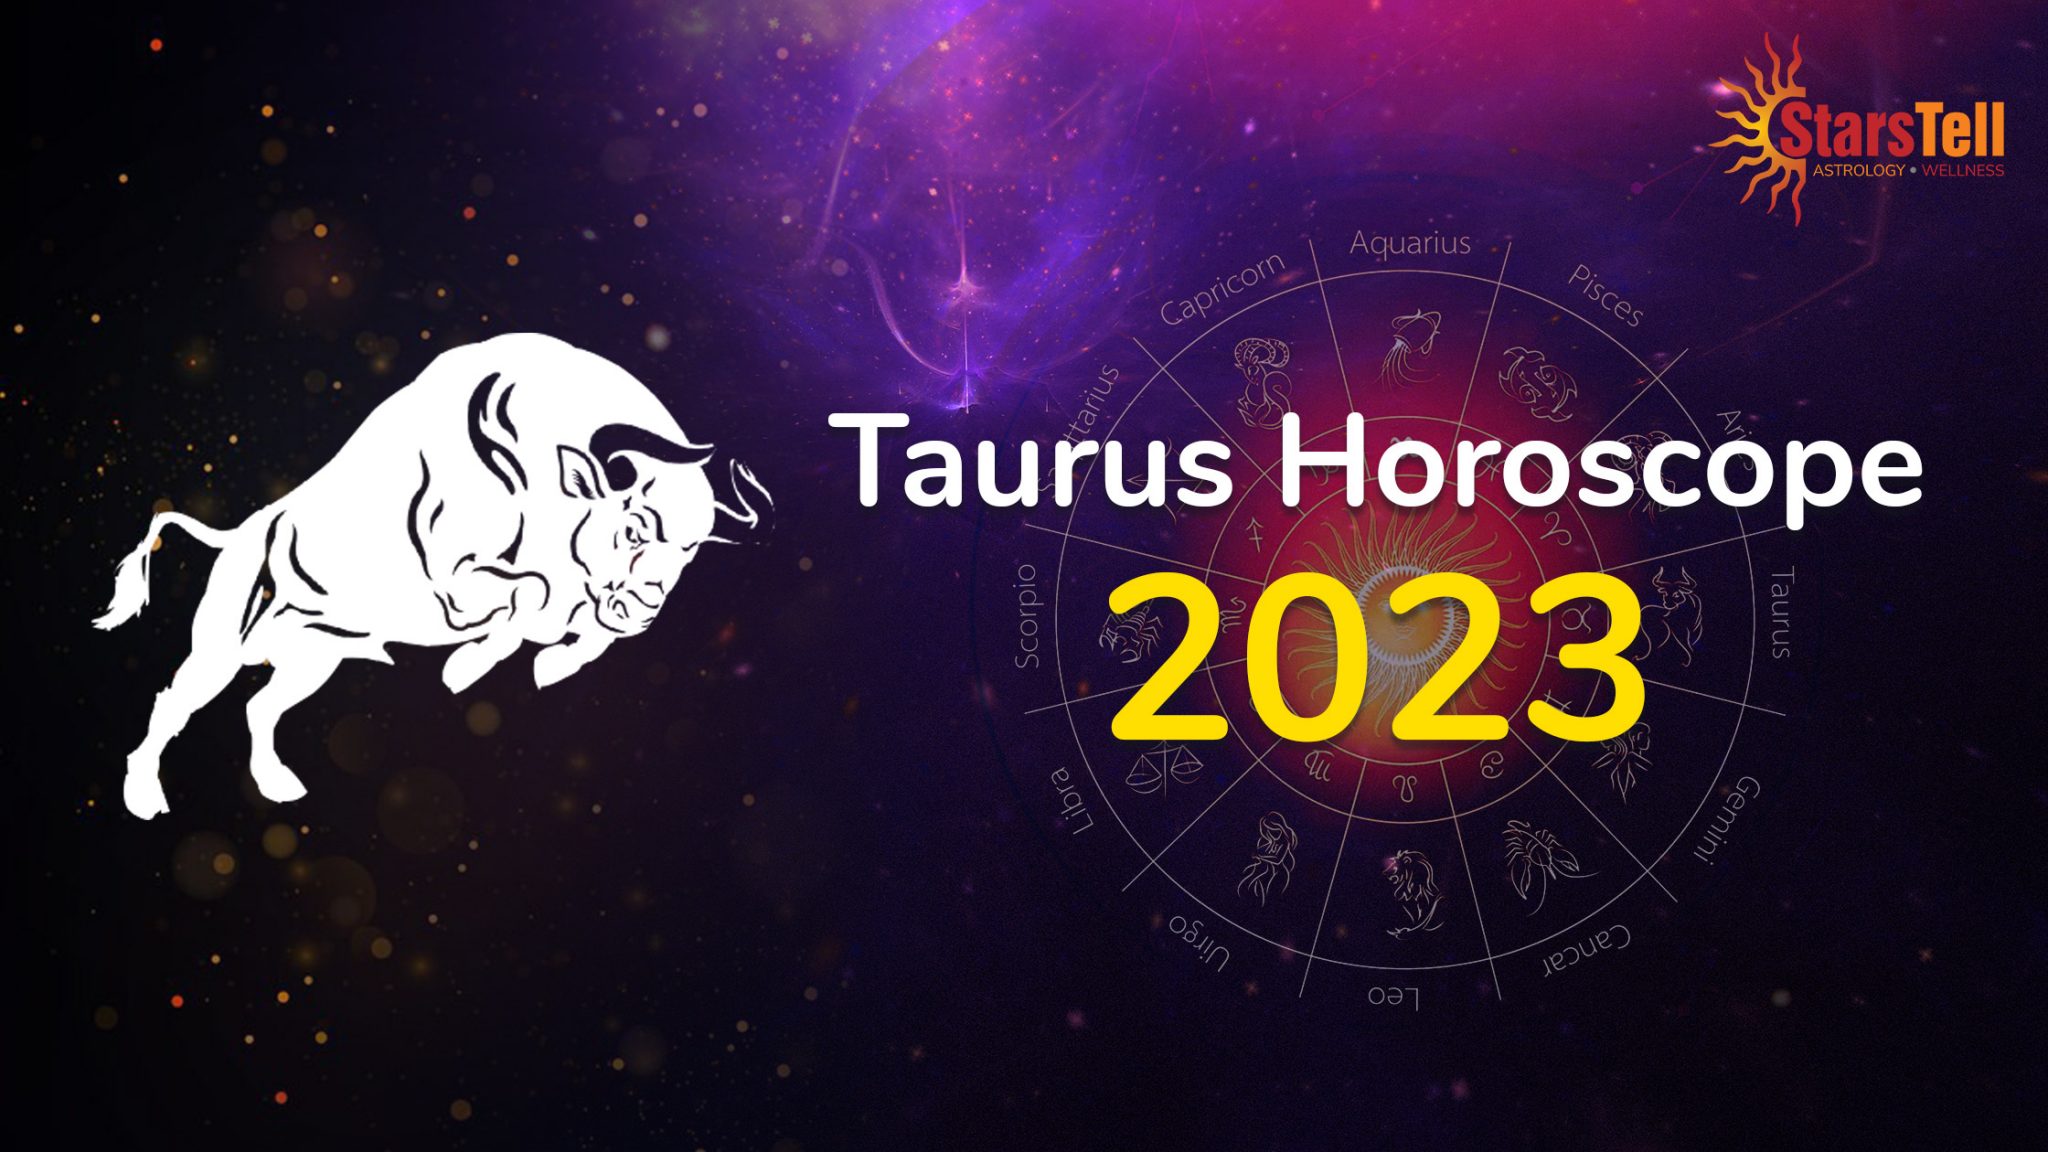 Taurus Horoscope 2023 What does 2023 hold for you? StarsTell